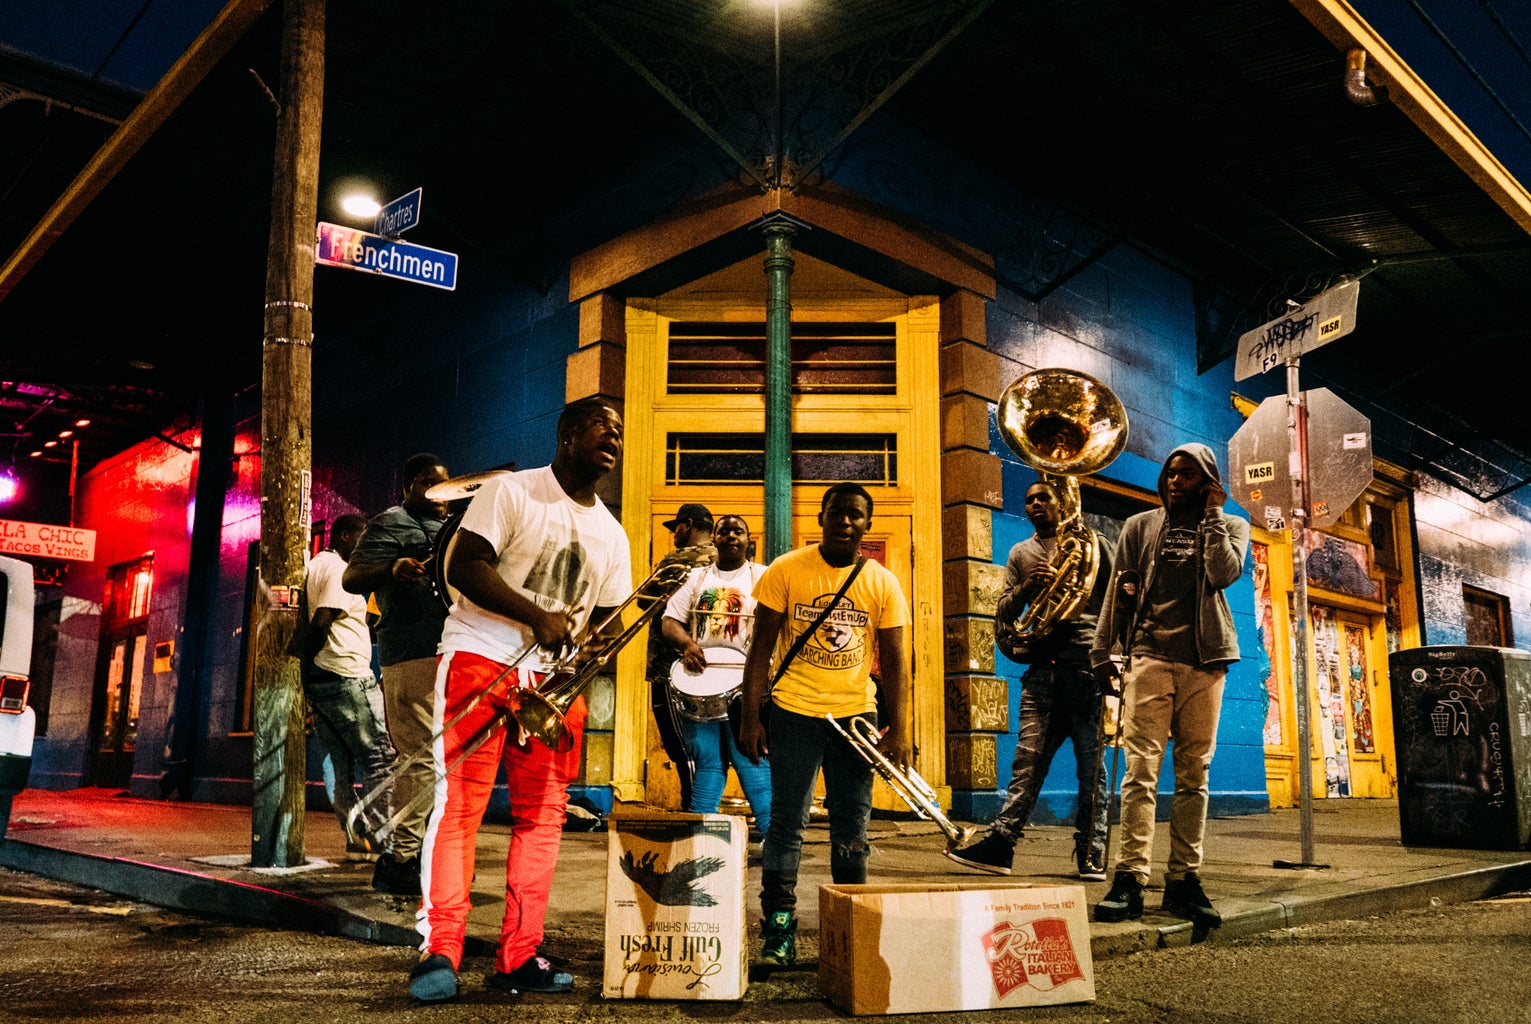 new orleans, a long weekend vacation destination